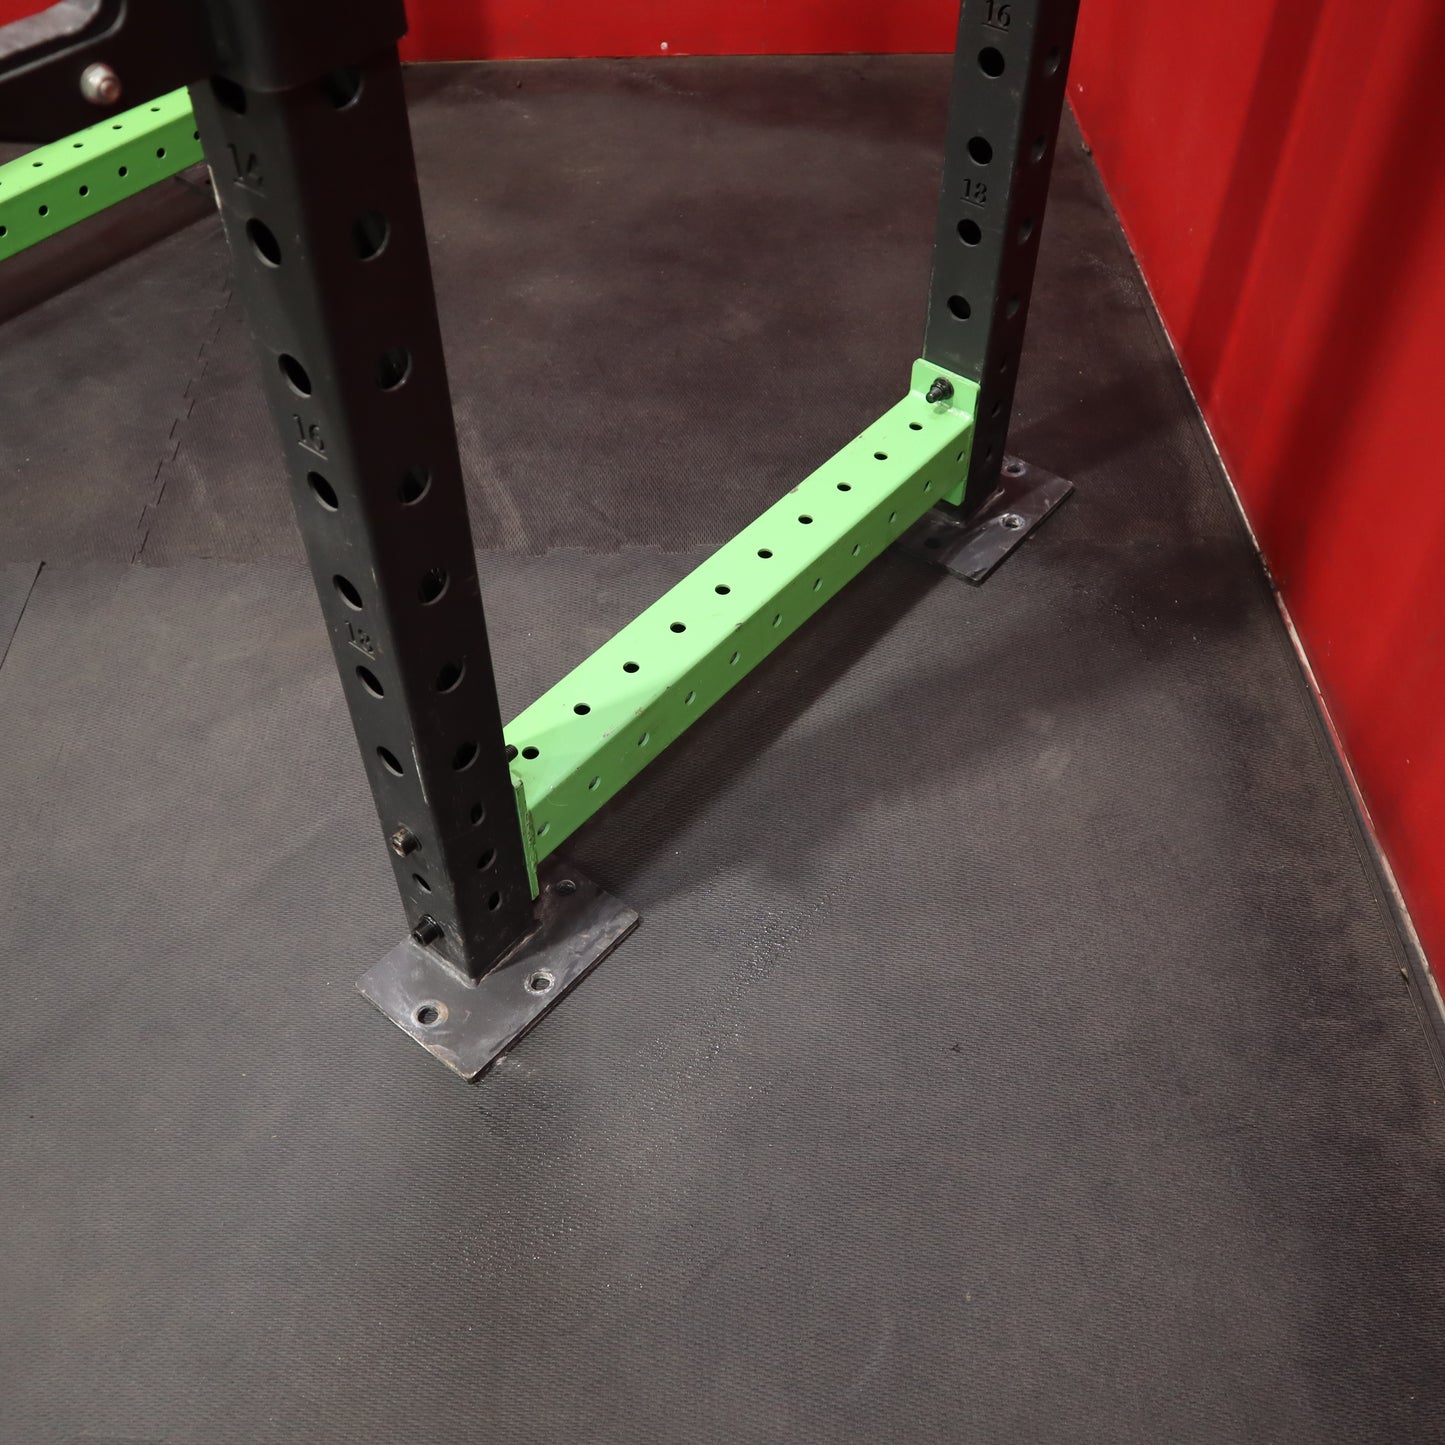 Heavy Duty Commercial Power Rack w/ Pull Up Bars (Refurbished)